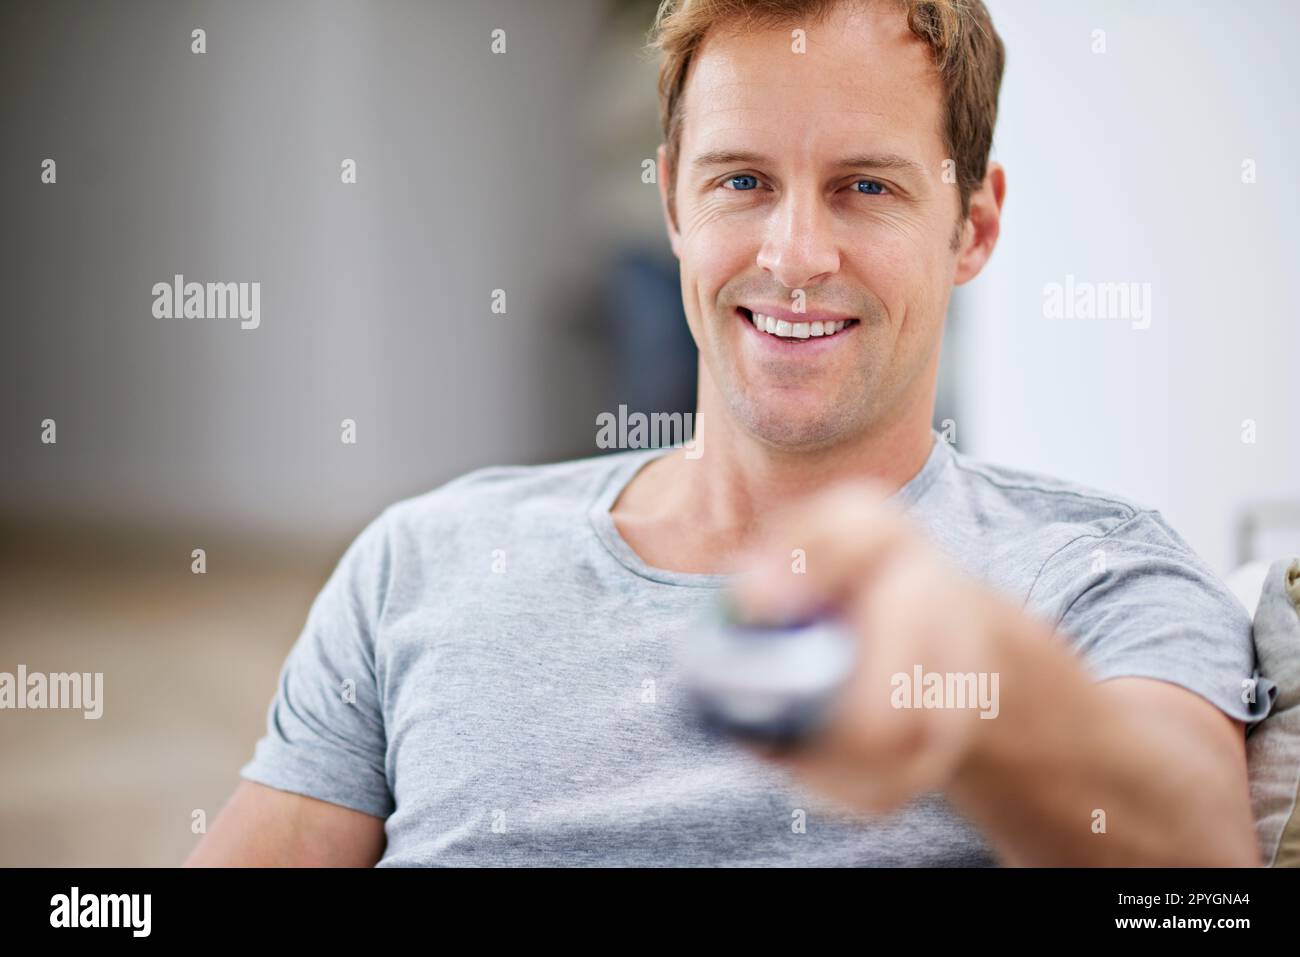 The life of a bachelor. a handsome man holding a remote control. Stock Photo